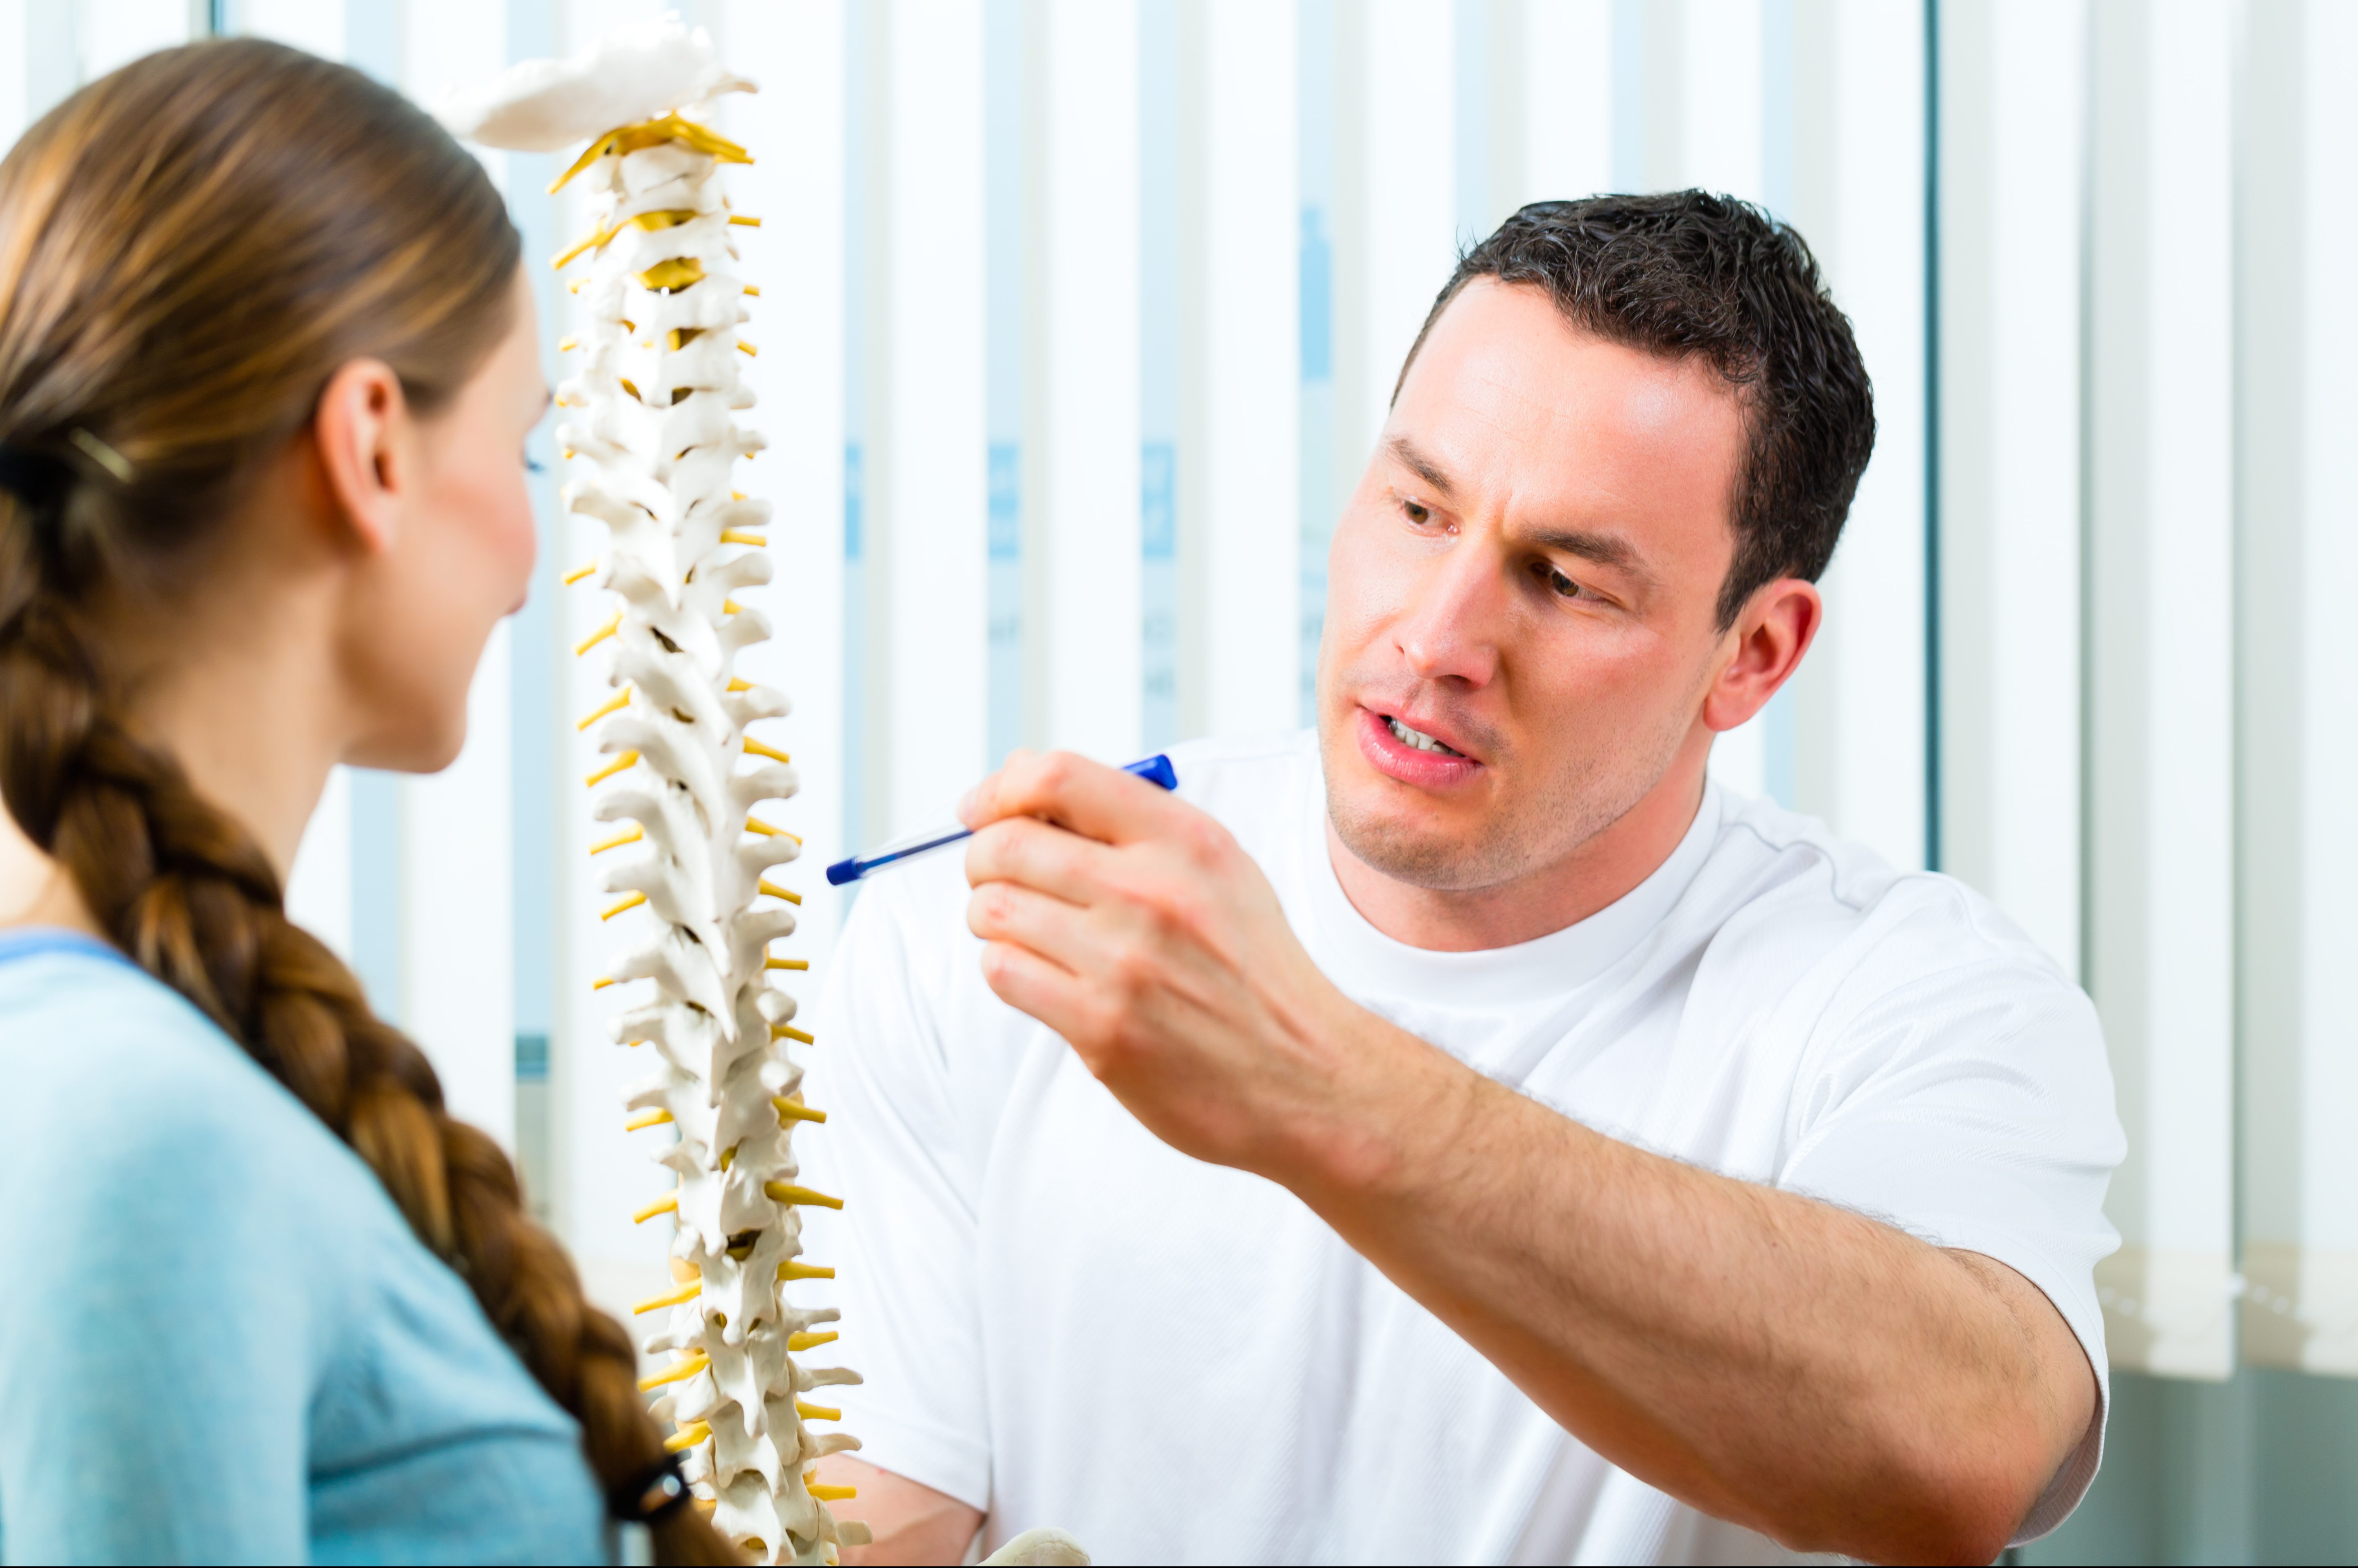 Physiotherapist,In,His,Practice,,He,Explains,A,Female,Patient,The